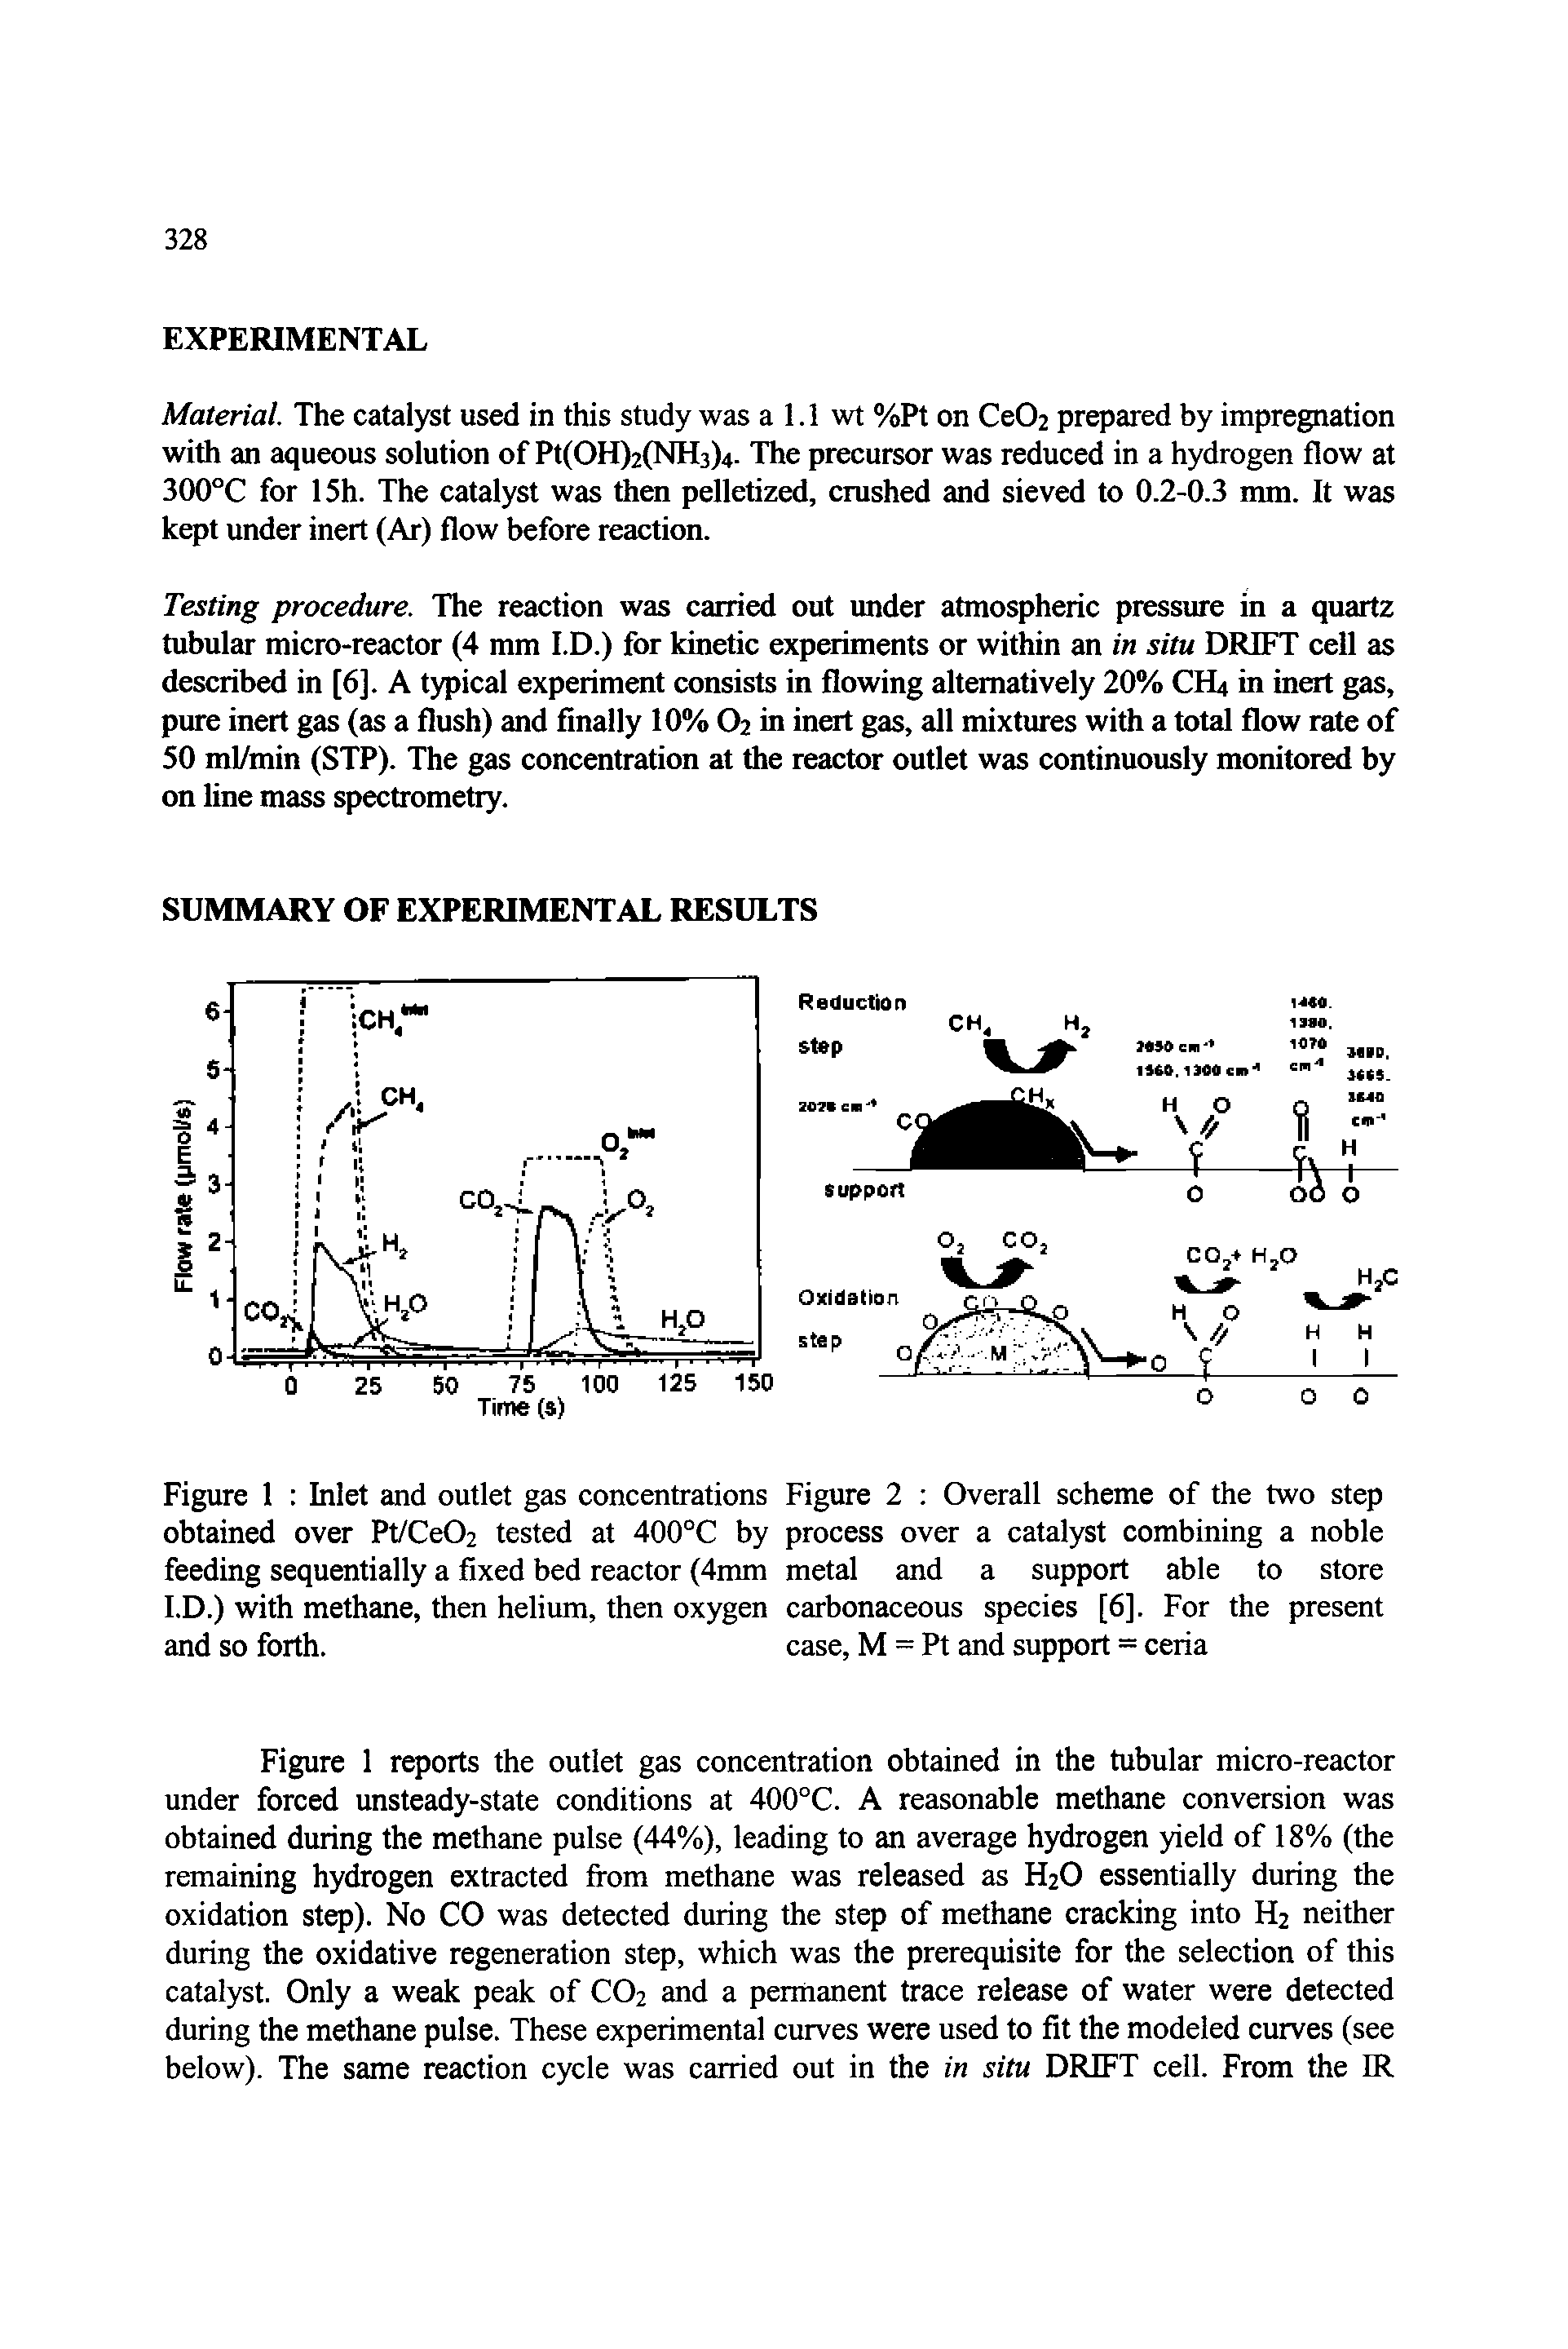 Figure 1 Inlet and outlet gas concentrations Figure 2 Overall scheme of the two step obtained over Pt/Ce02 tested at 400°C by process over a catalyst combining a noble feeding sequentially a fixed bed reactor (4mm metal and a support able to store I.D.) with methane, then helium, then oxygen carbonaceous species [6]. For the present and so forth. case, M = Pt and support = ceria...